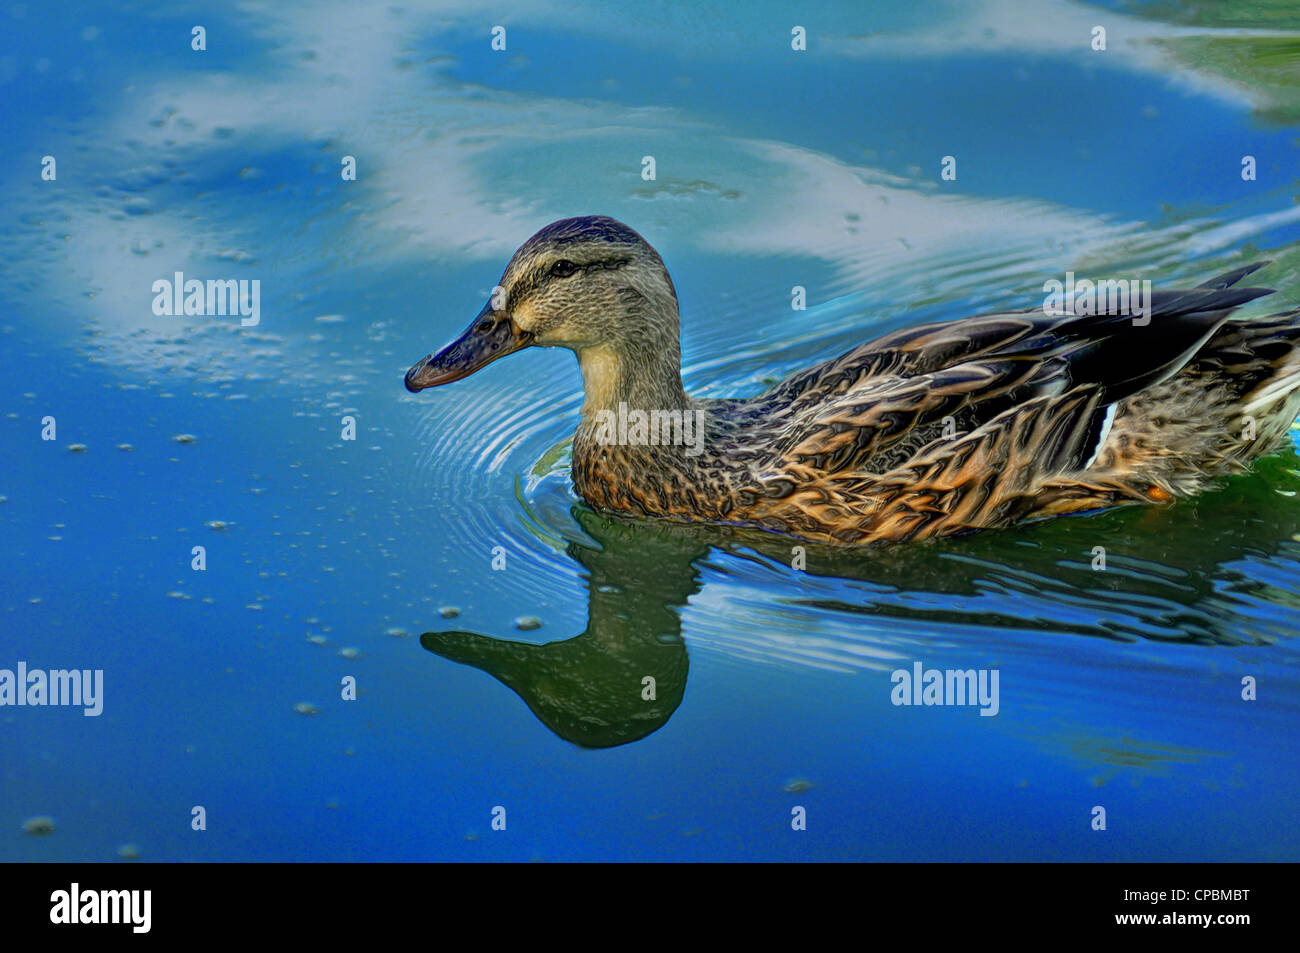 Female wood duck swimming in a blue reflecting pond Stock Photo